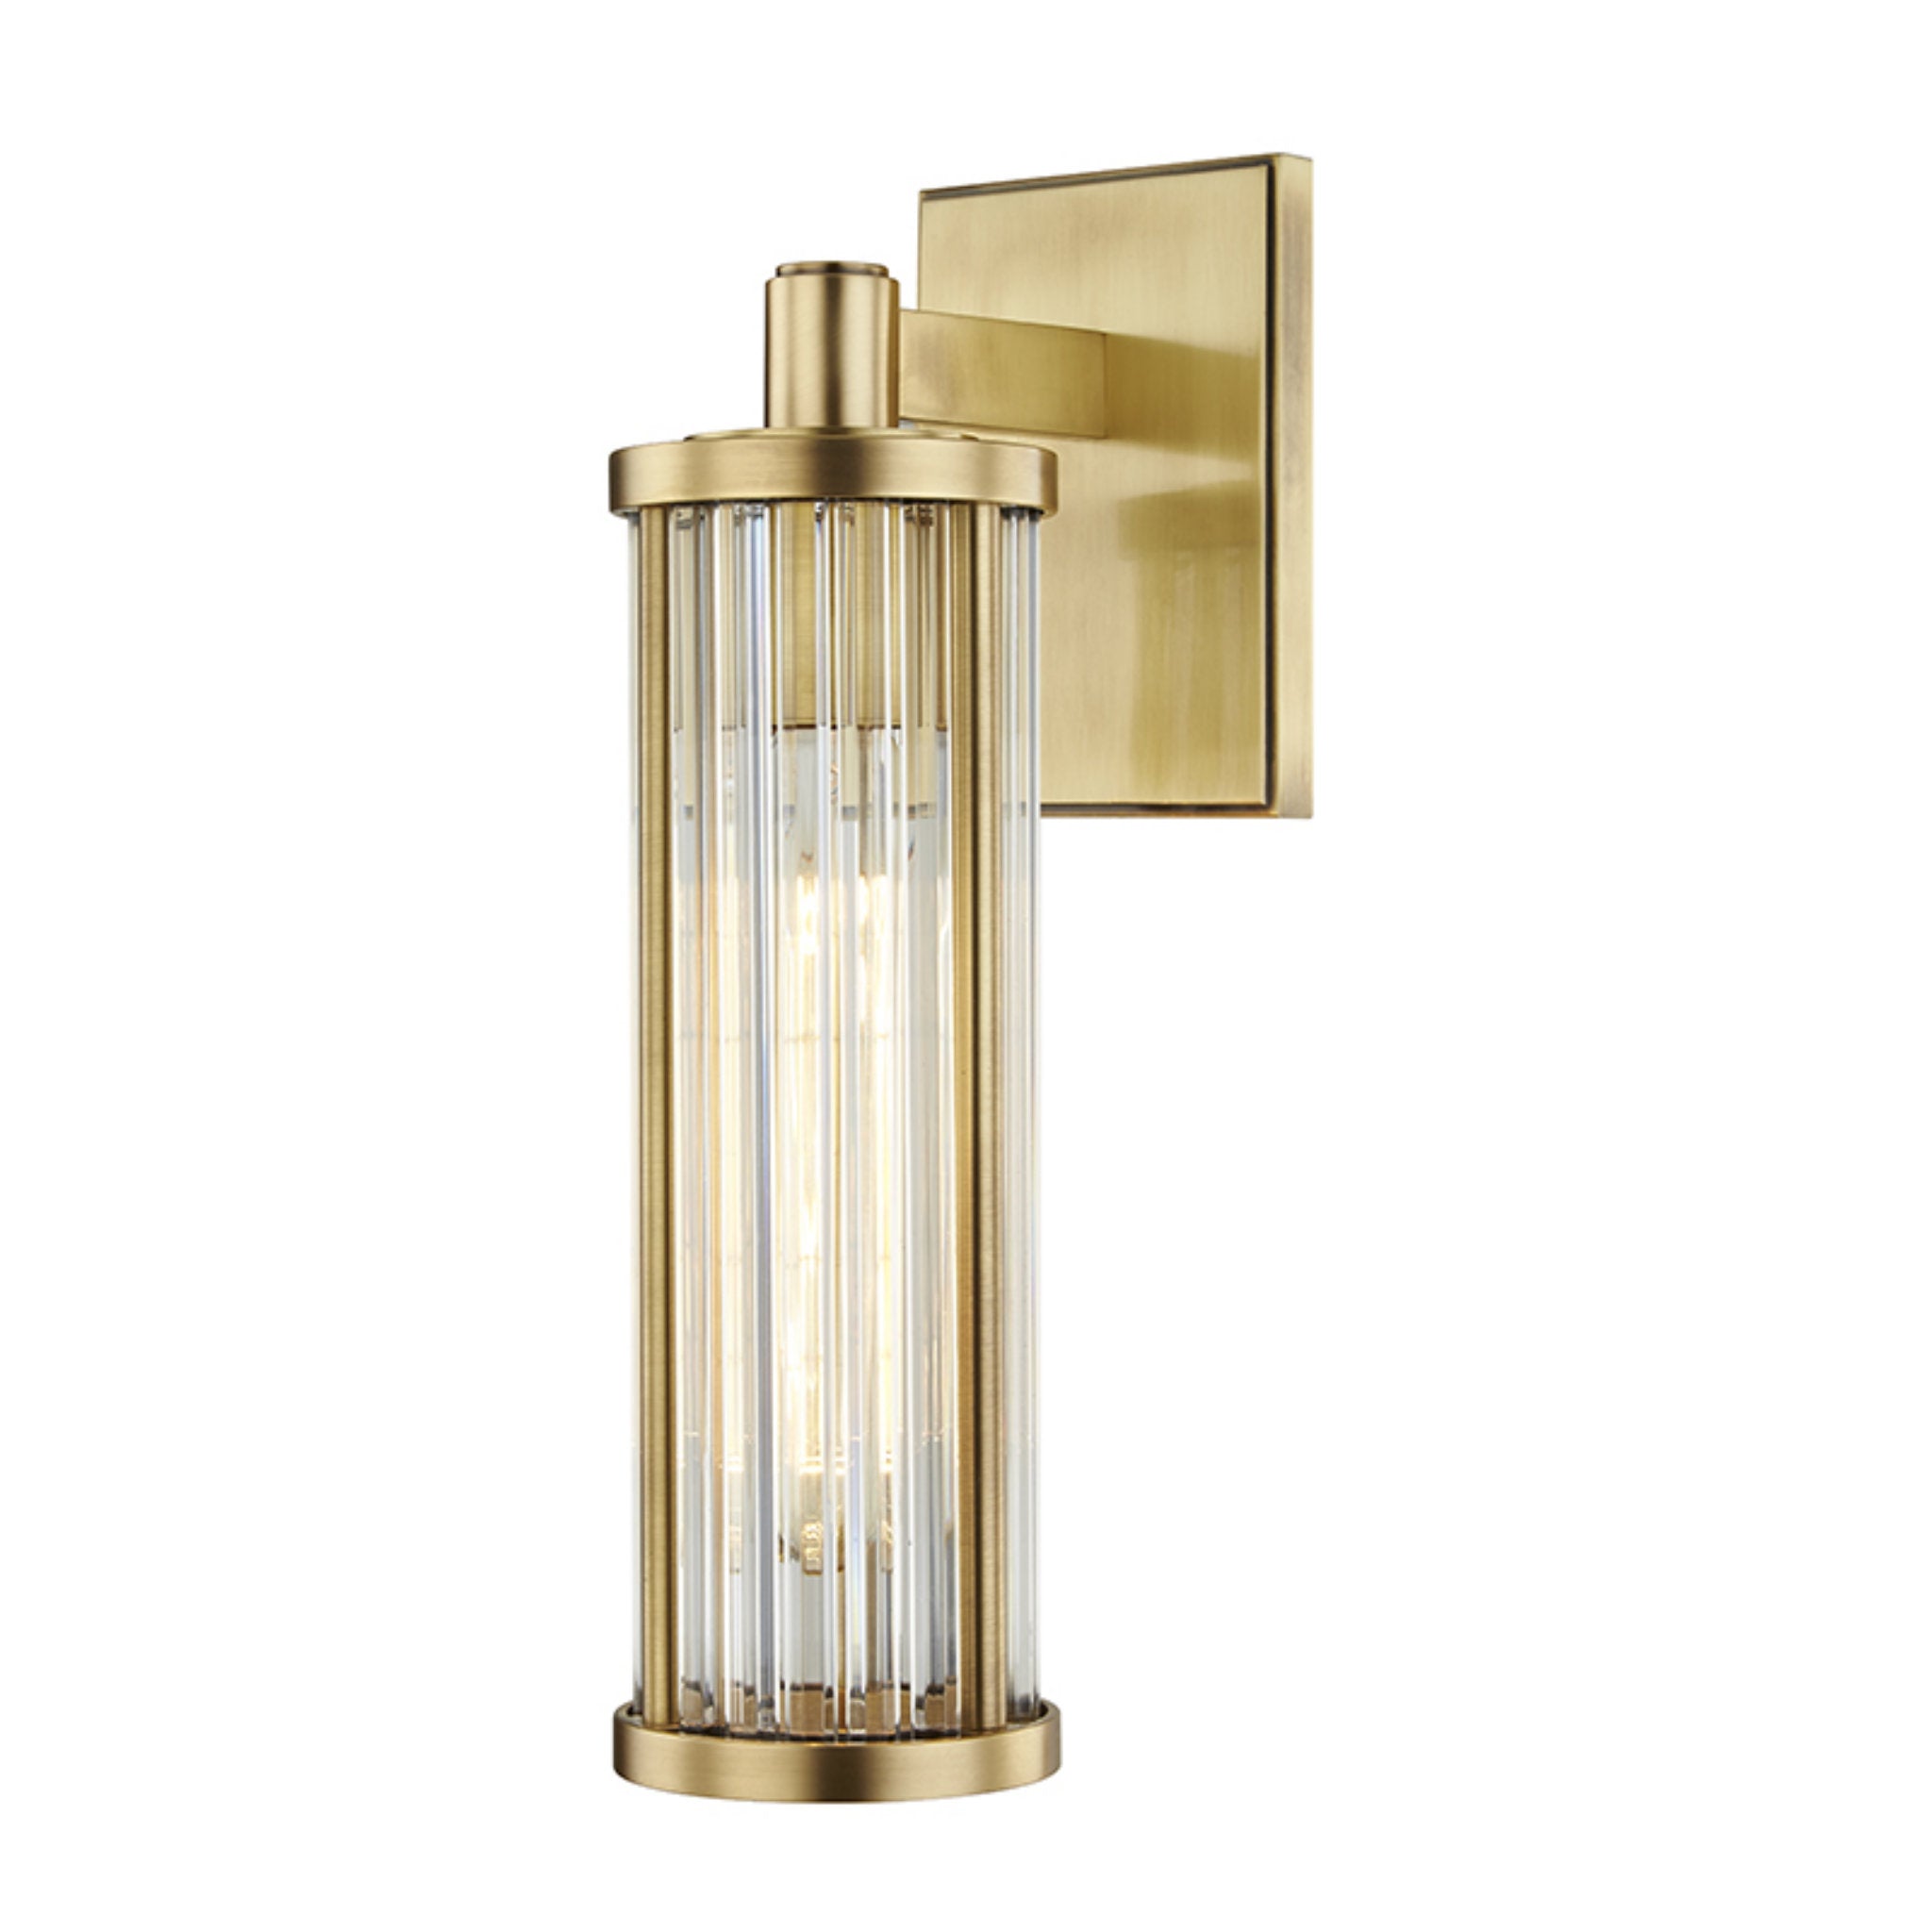 Marley 1 Light Wall Sconce in Aged Brass